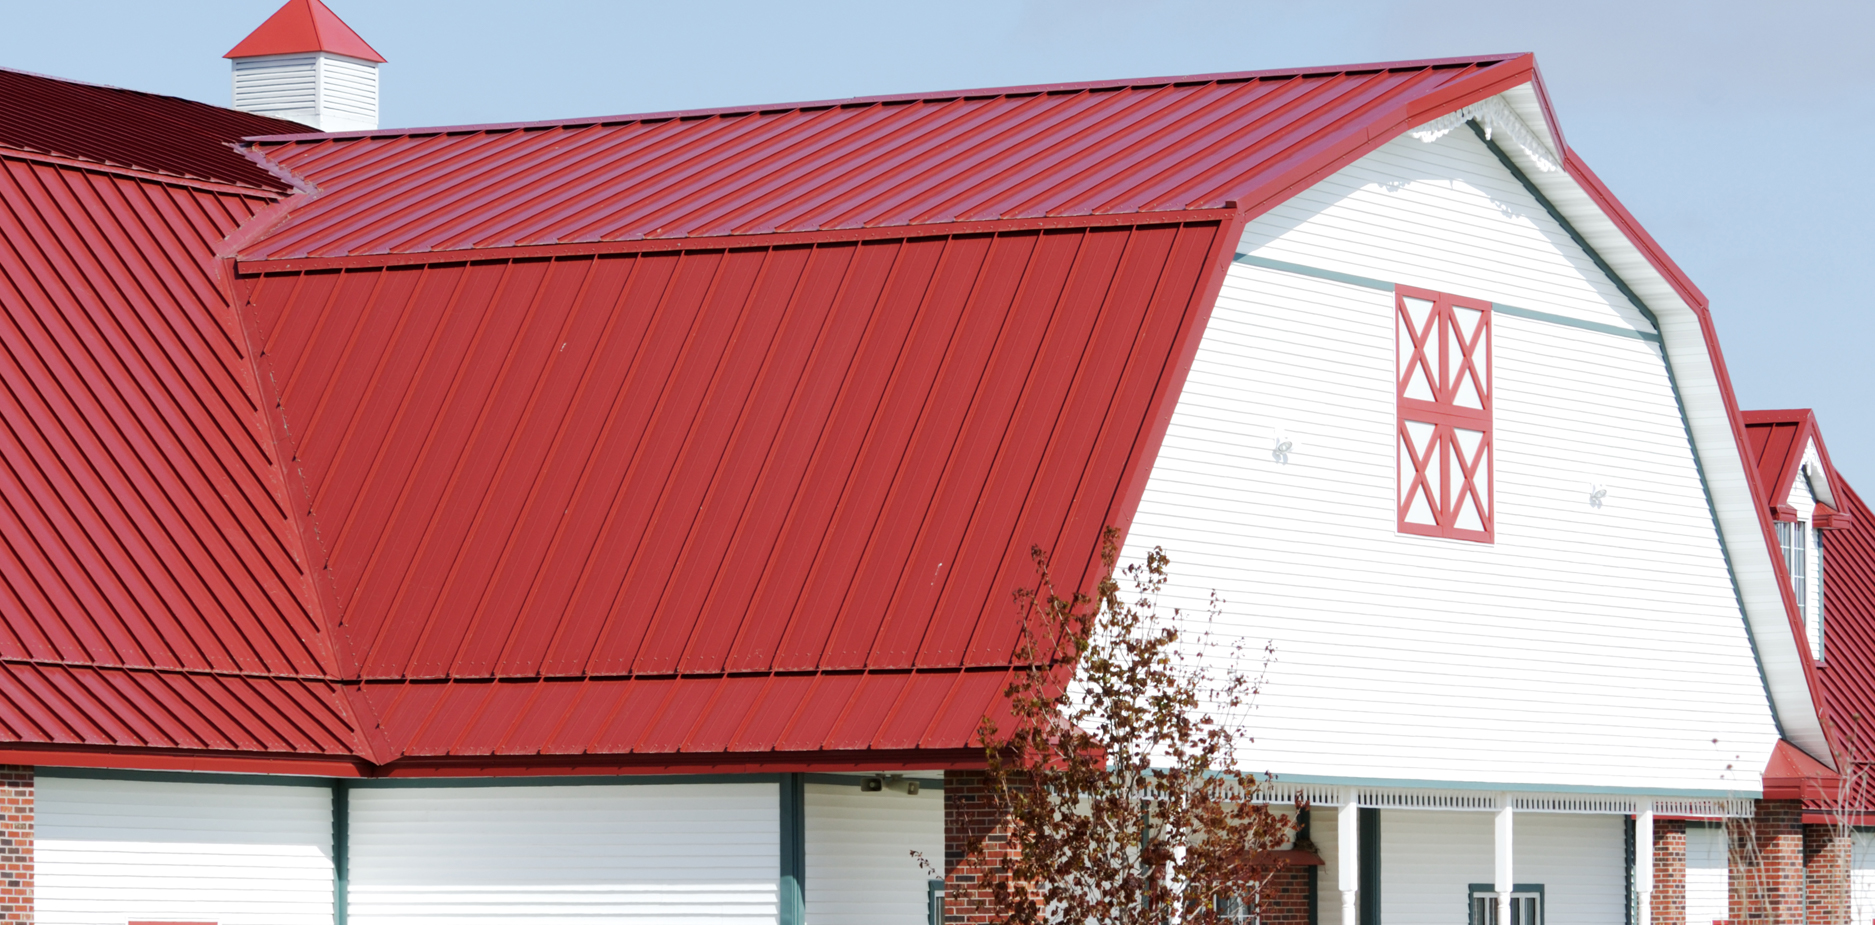 Large metal roofing projects